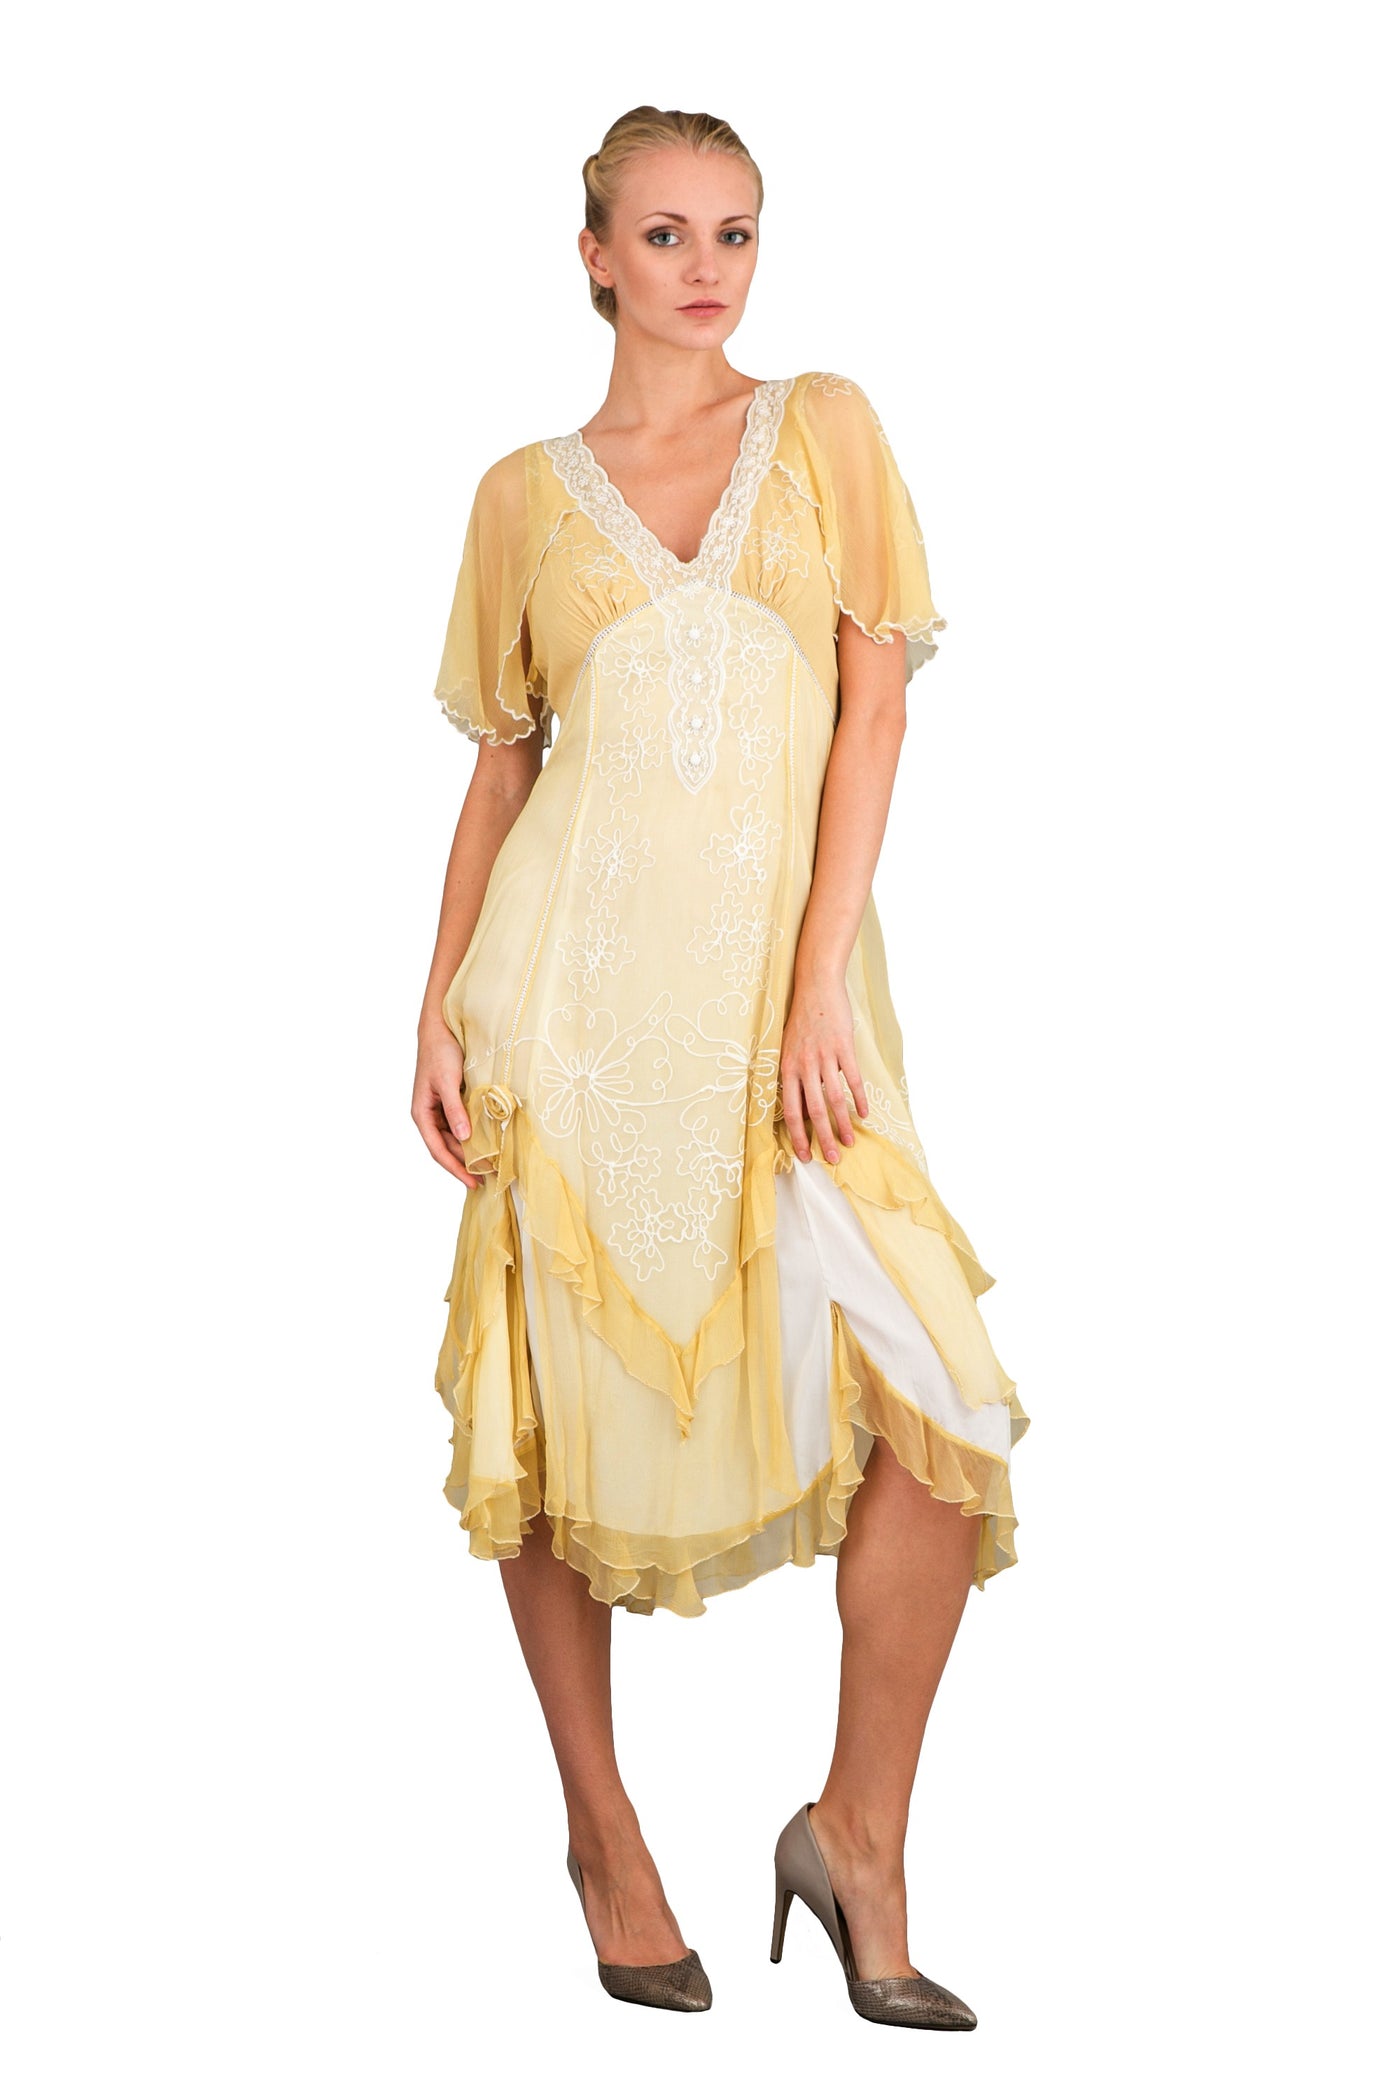 Romantic Vintage Style Party Dress in Lemon by Nataya -  SOLD OUT